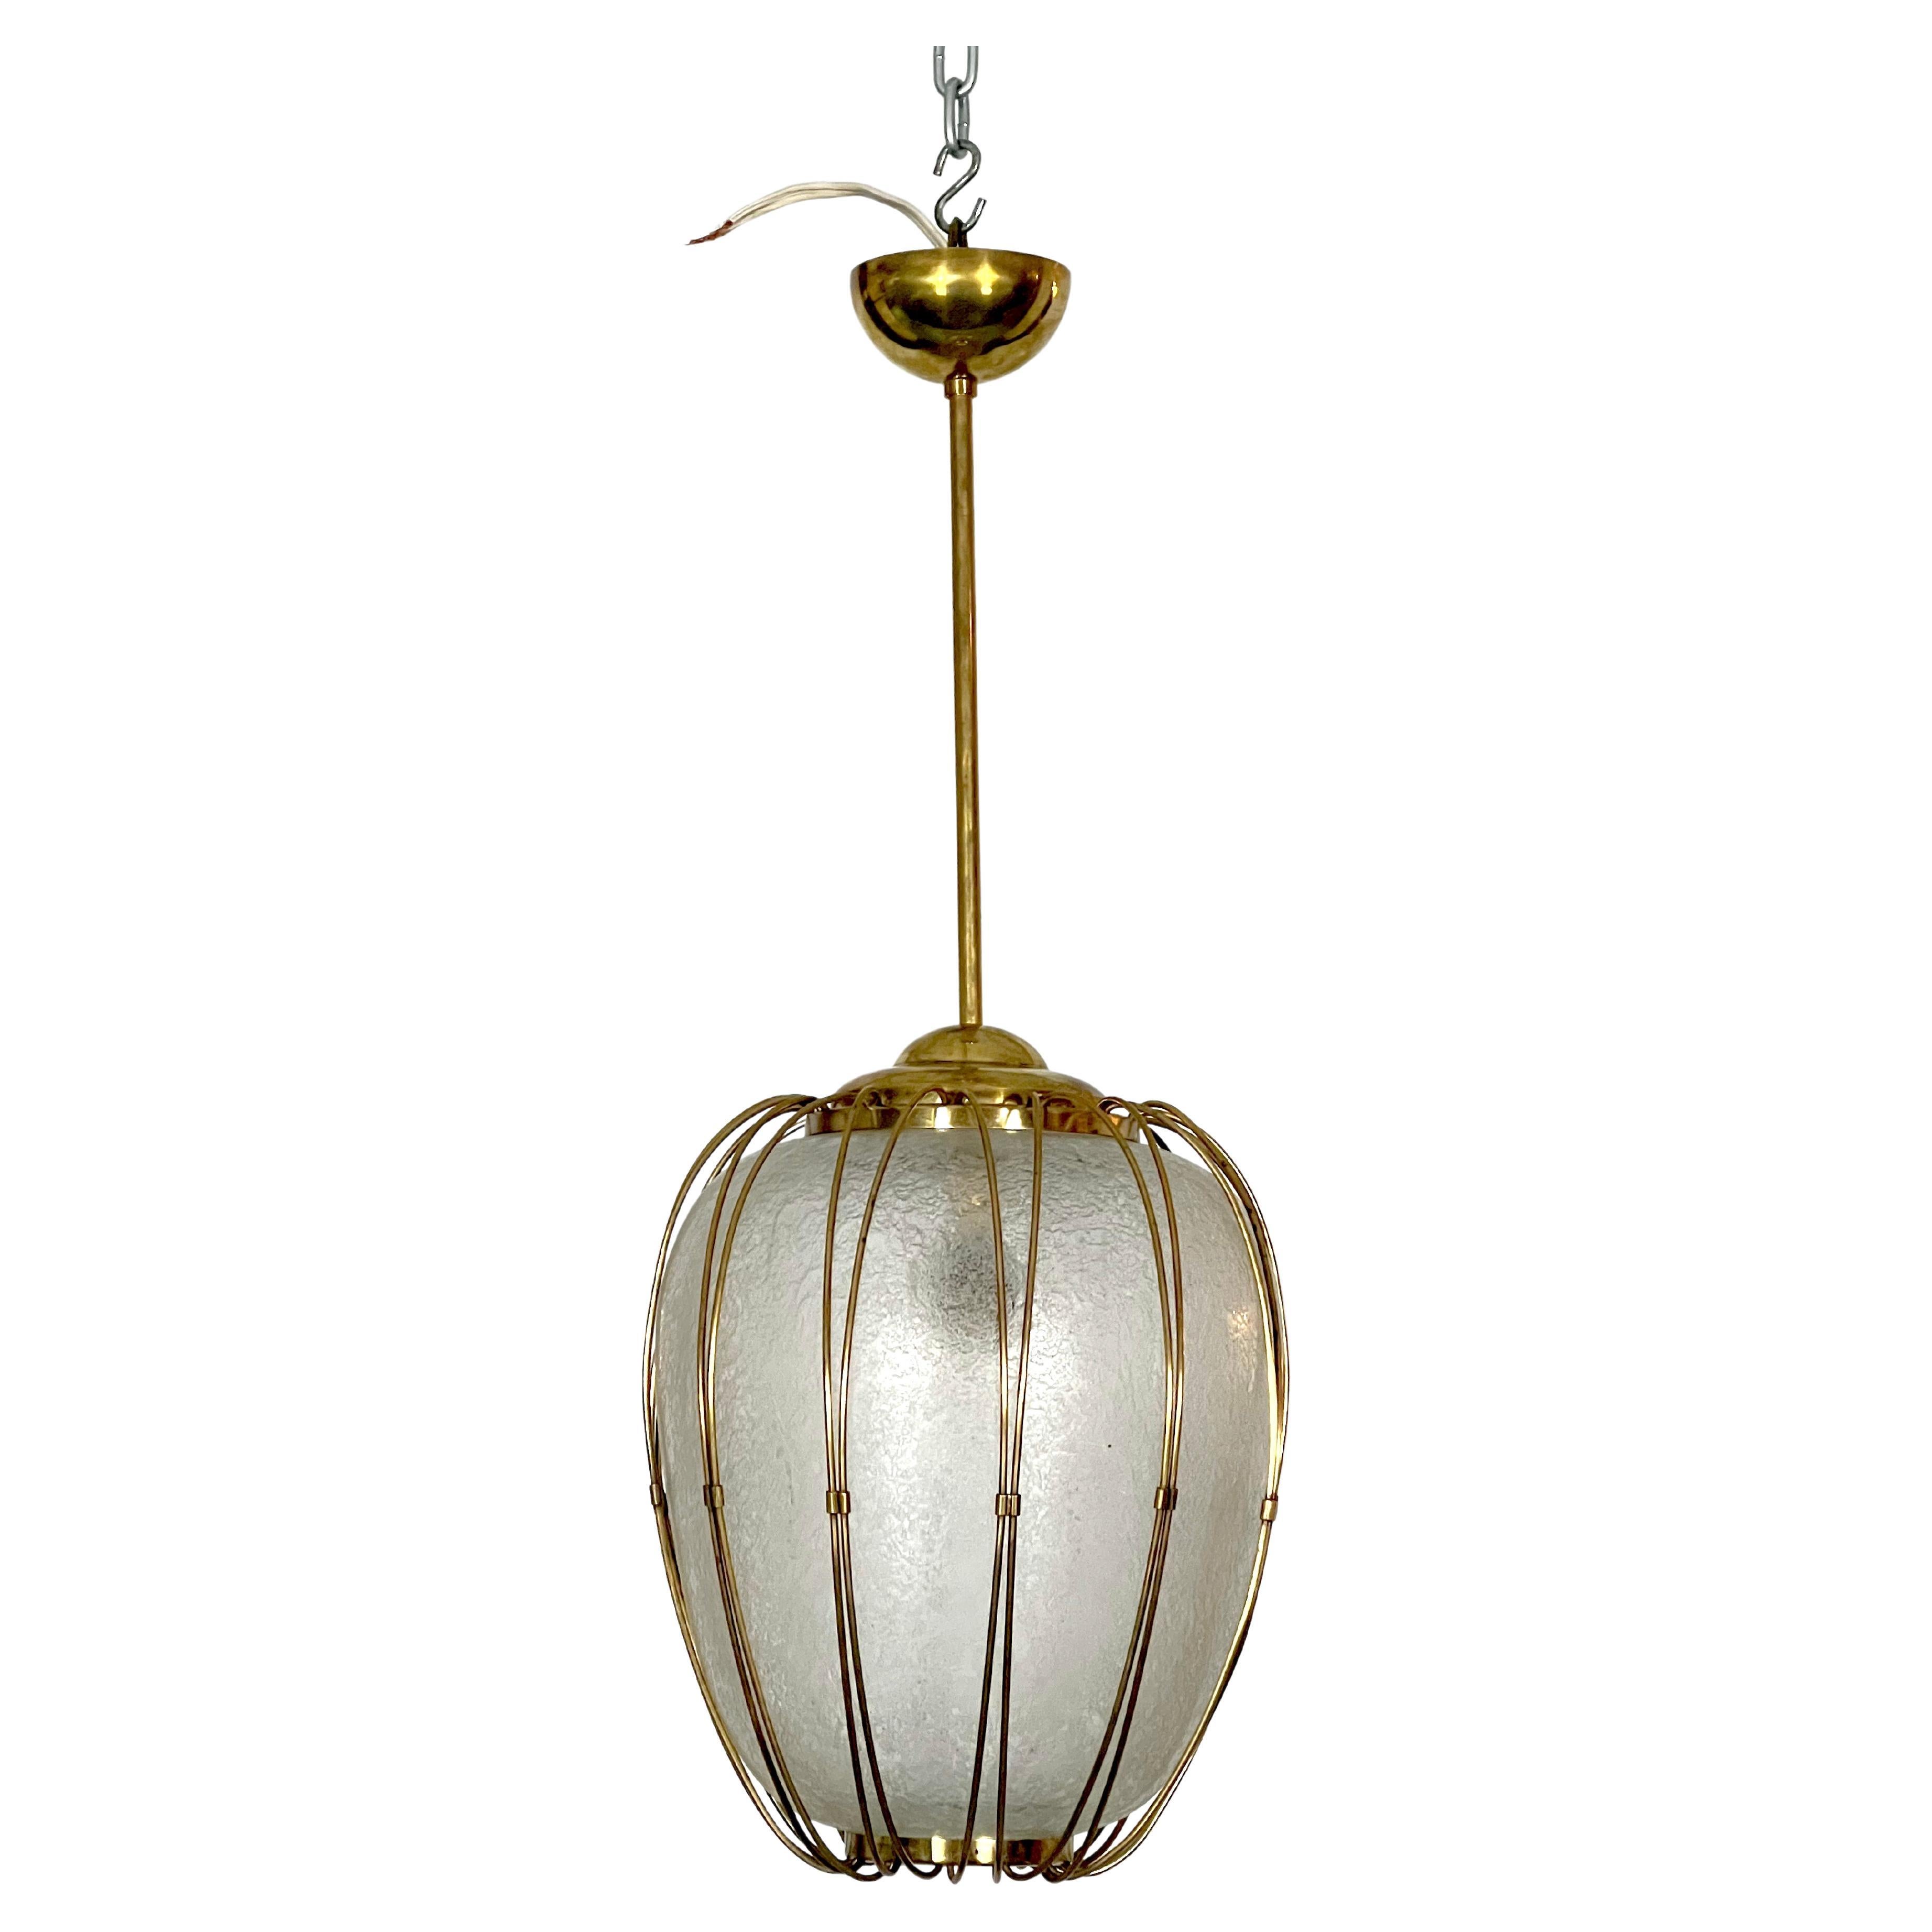 Arredoluce Monza, Brass and Etched Glass Chandelier from 50s